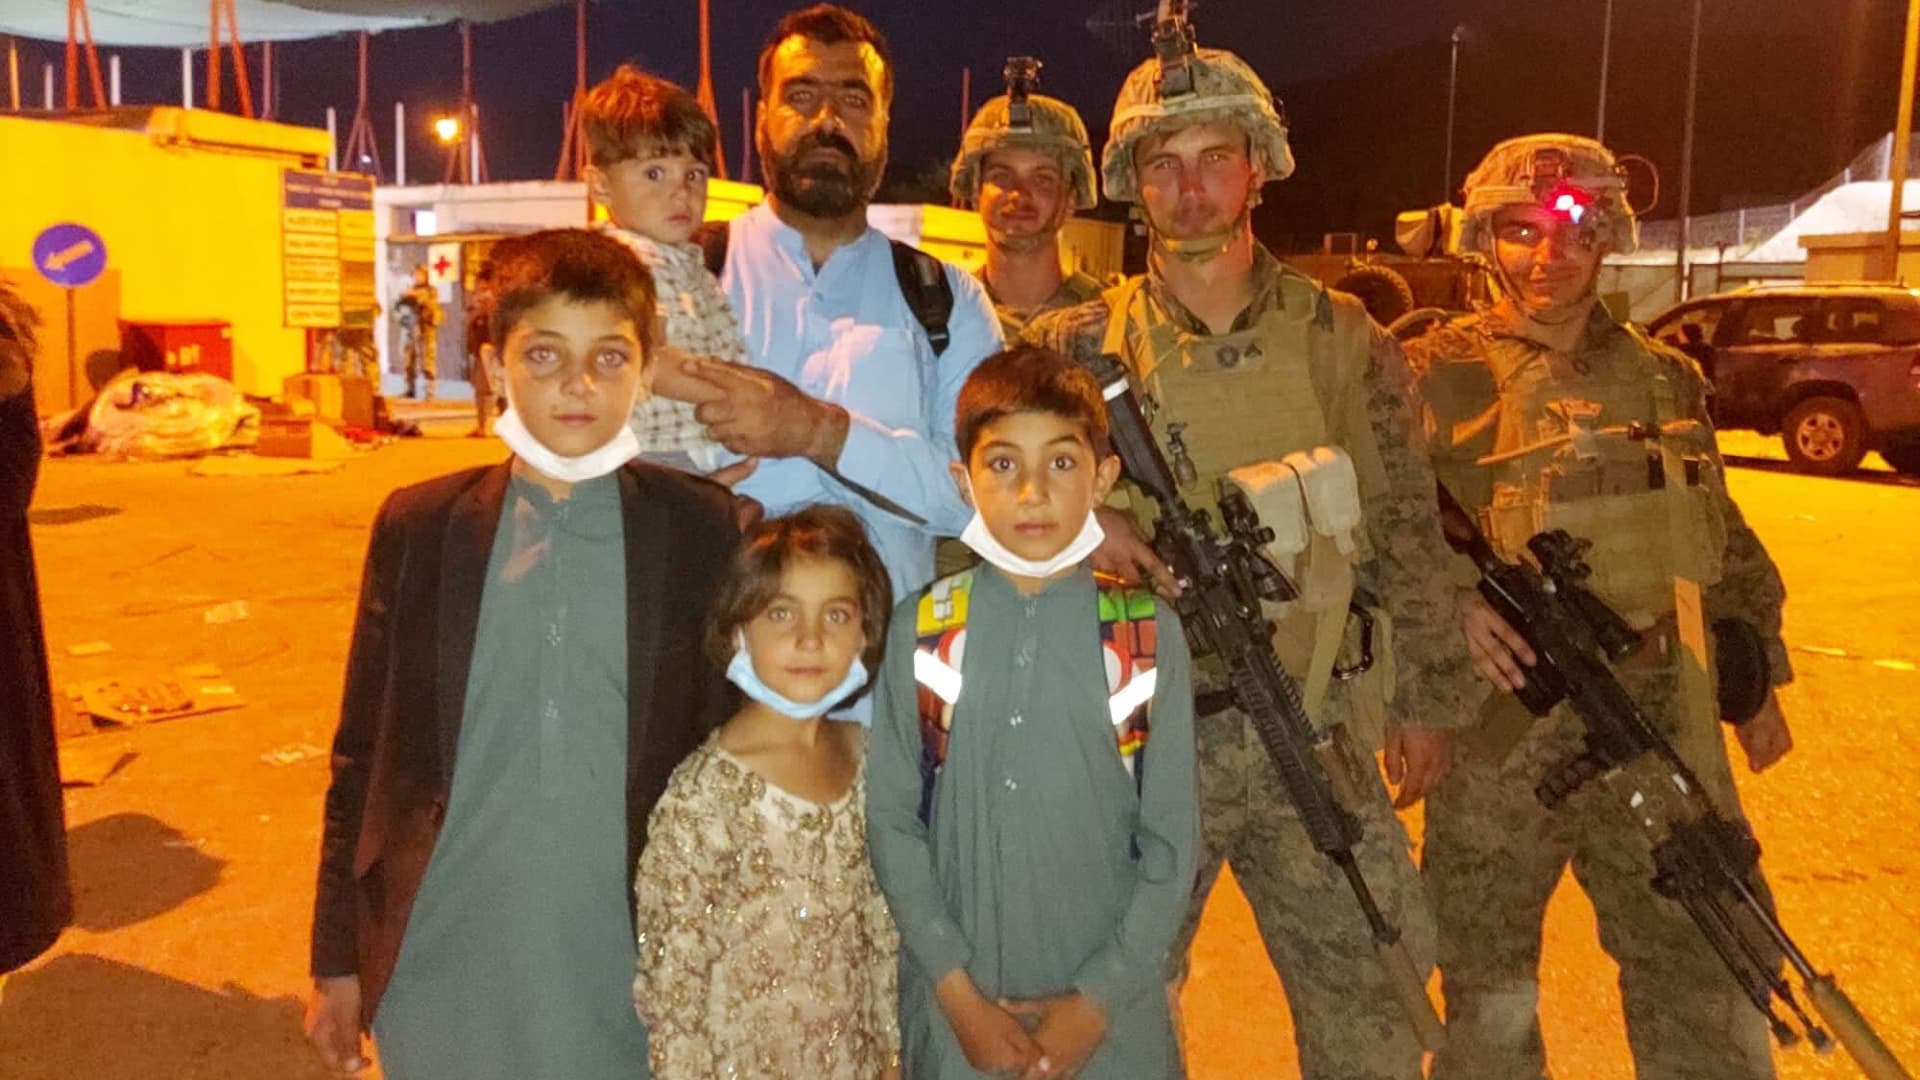 Antifullah Ahmadzai, a former Afghan interpreter for the U.S. military, stands with his children and U.S. Marines at Hamid Karzai International Airport in Kabul, Afghanistan.